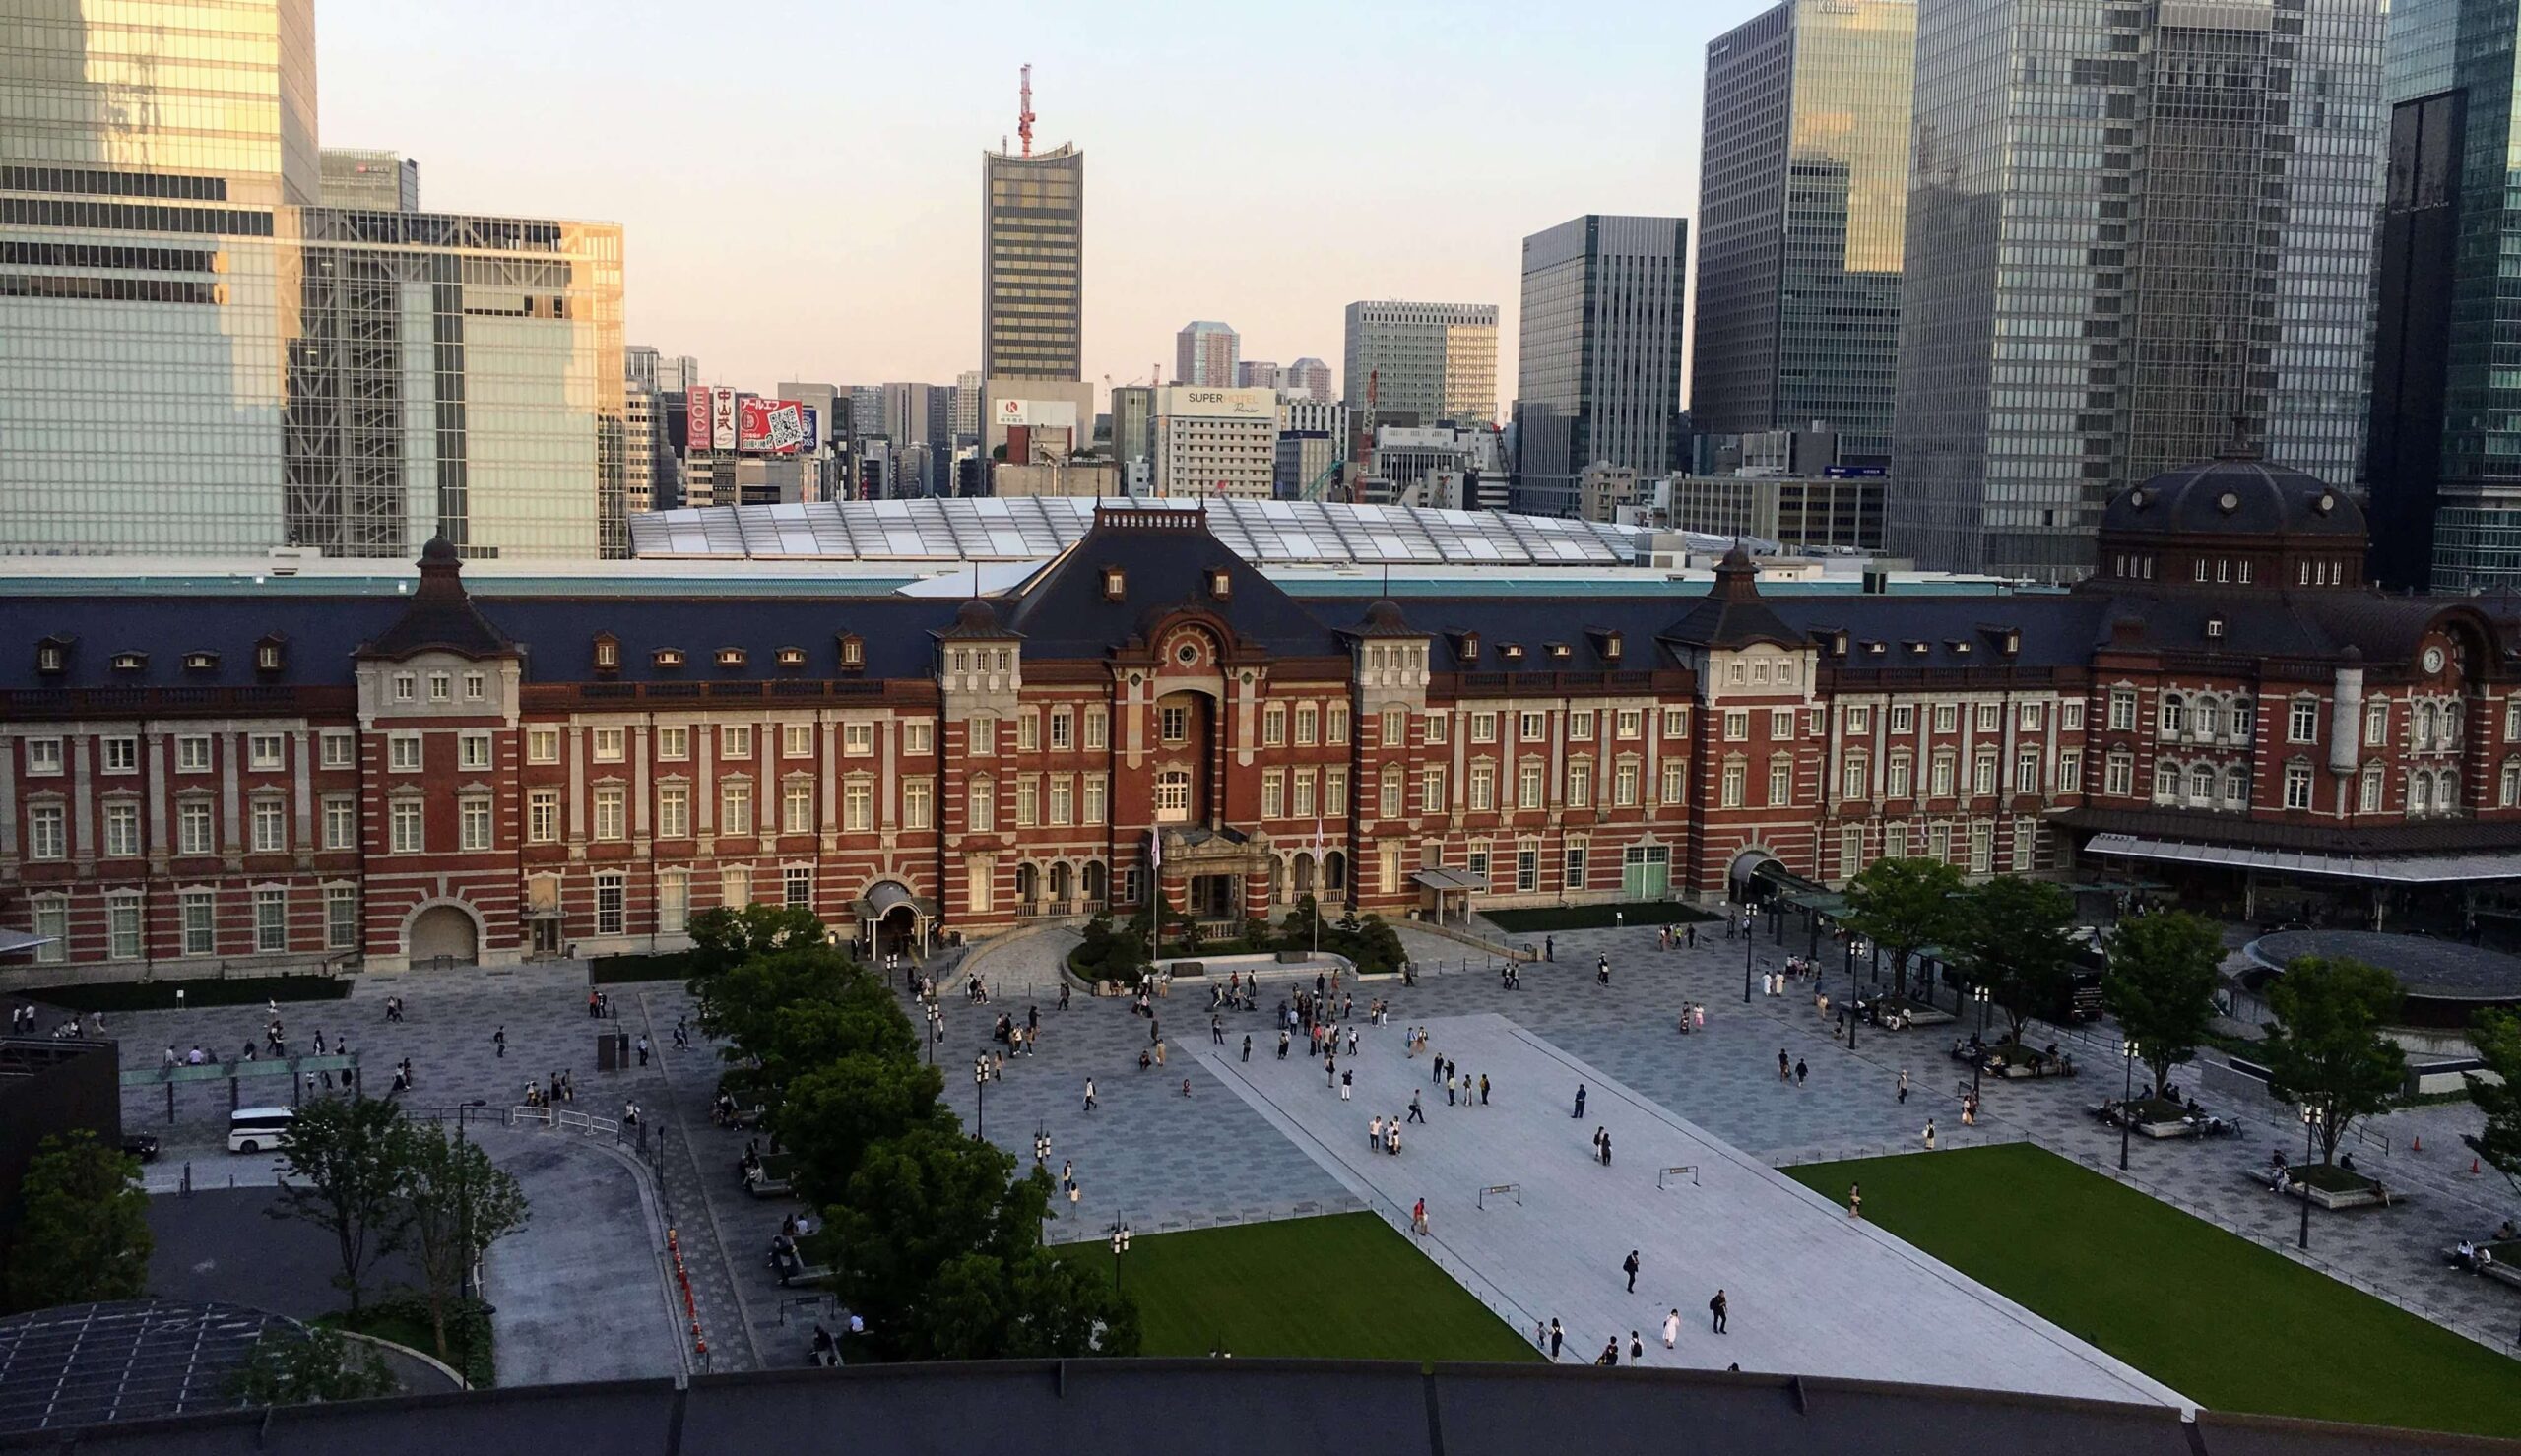 Tokyo station, rainy day things to do in Tokyo, Tokyo rainy day activities